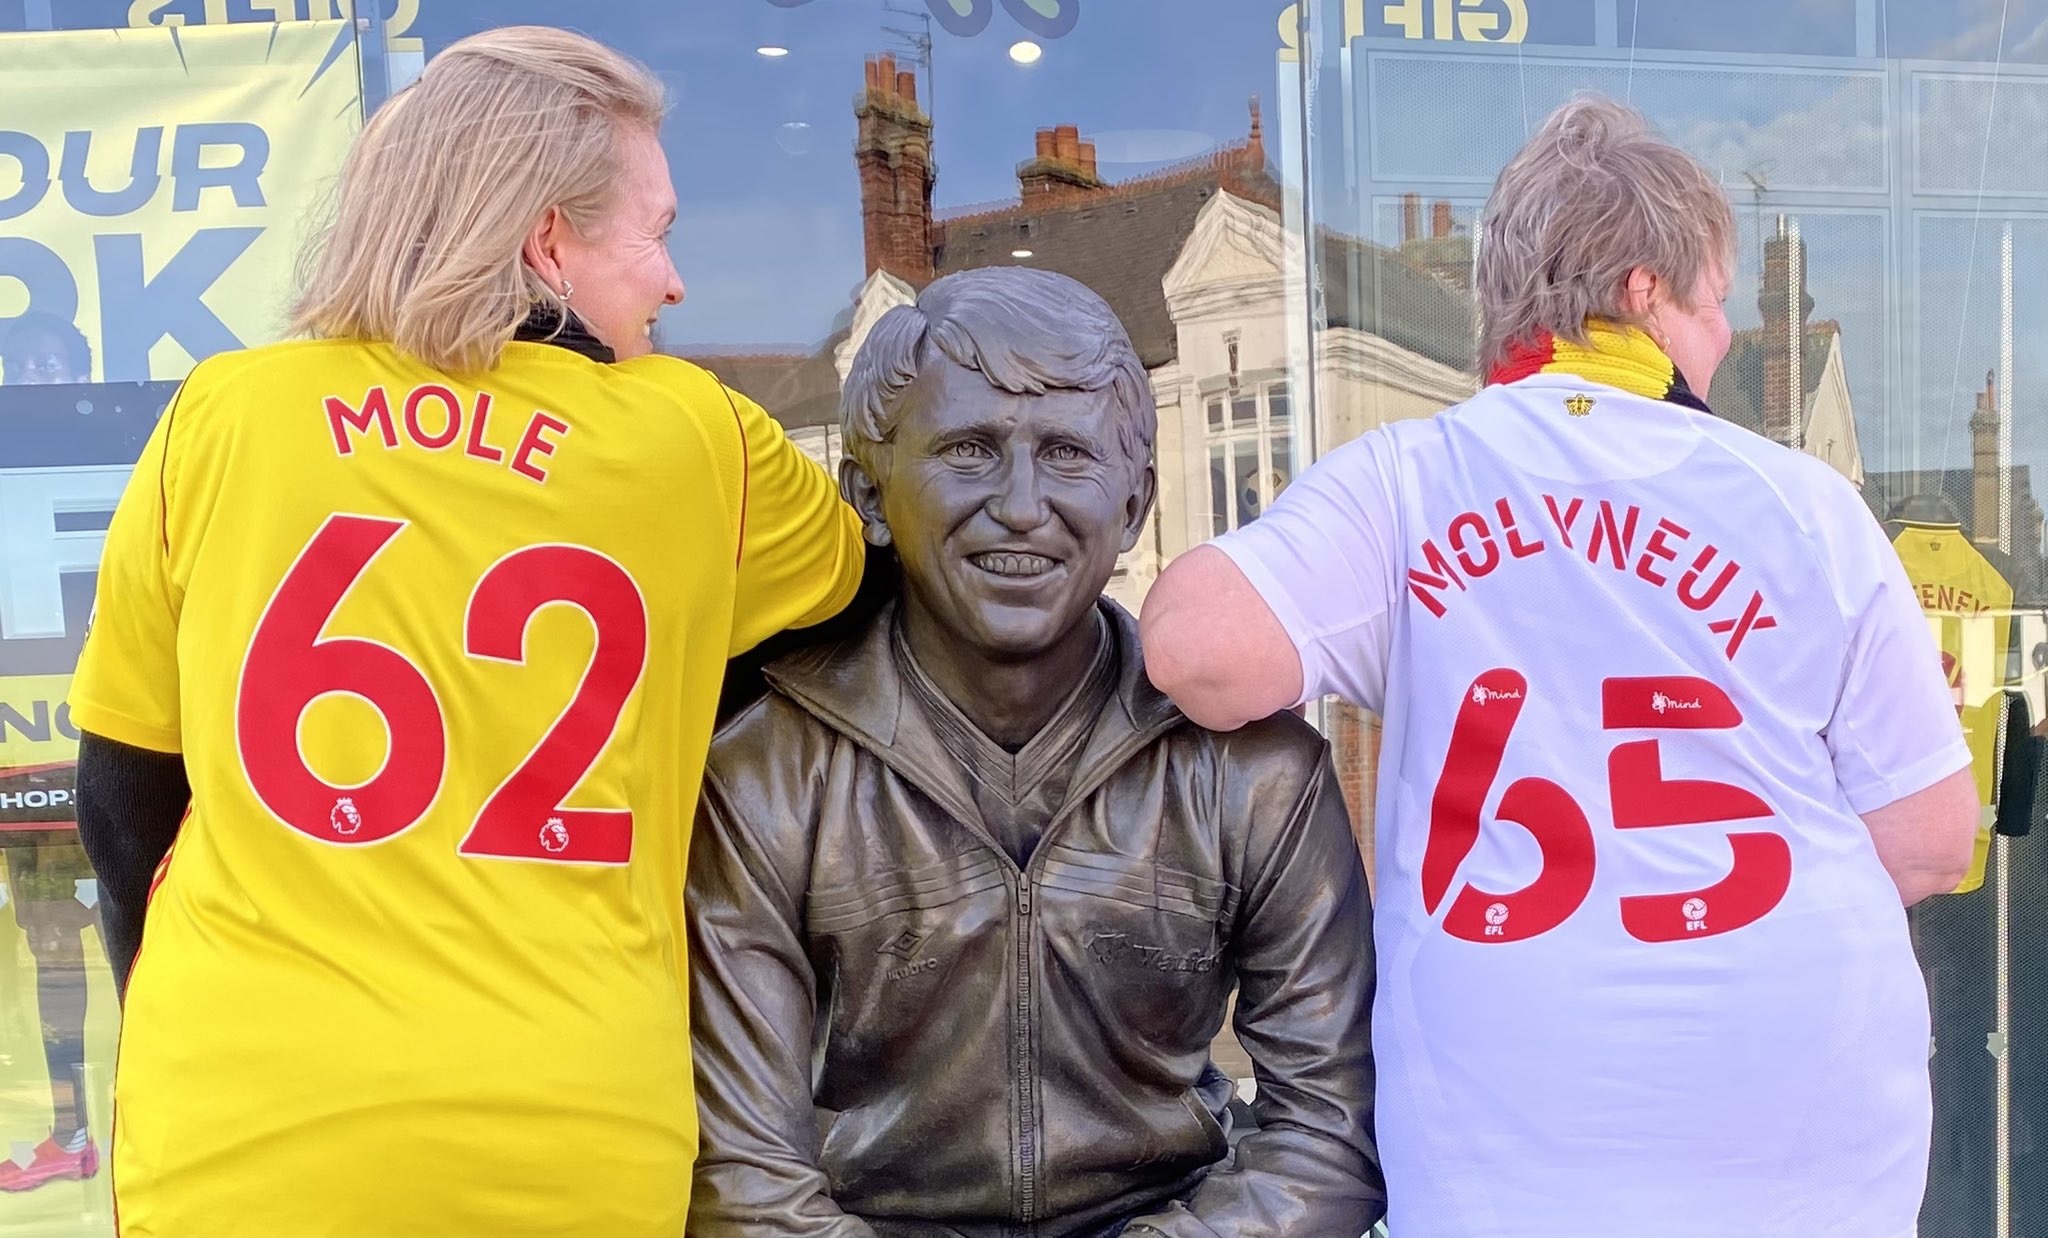 The family took a pic with the Graham Taylor statue